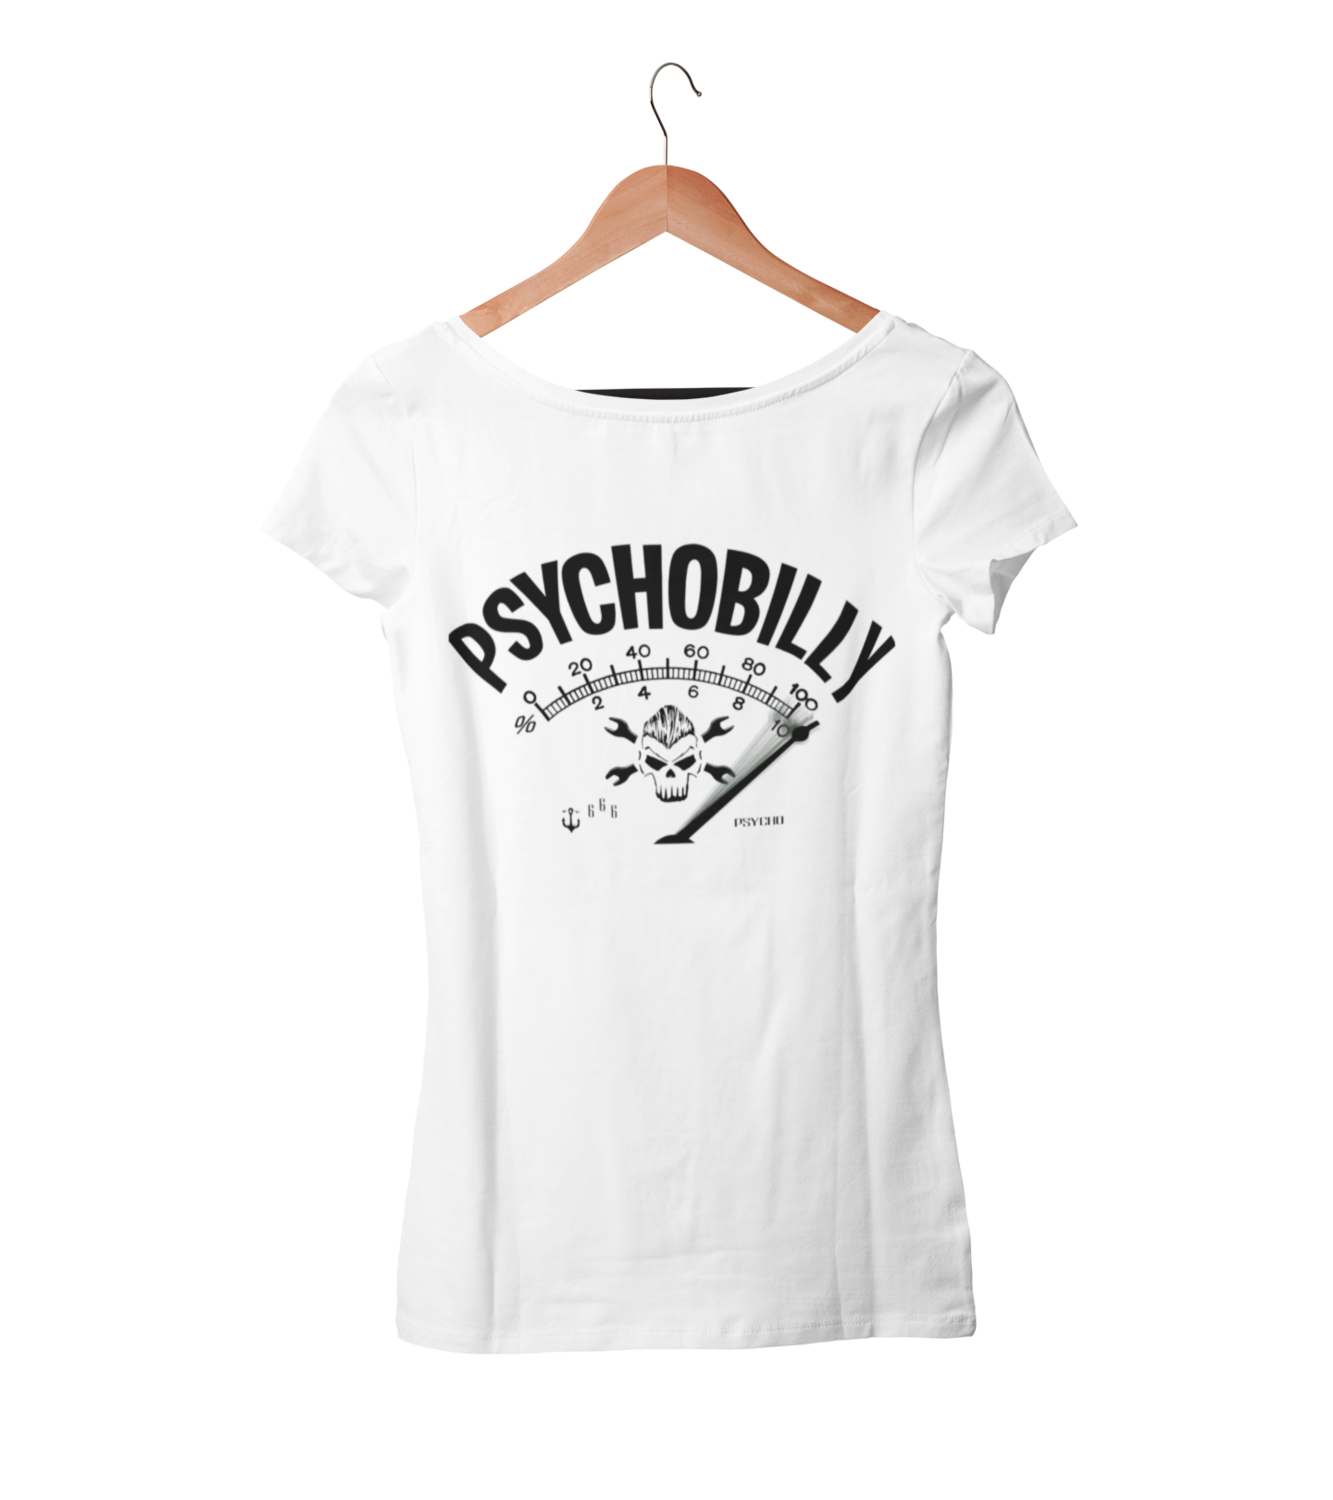 PSYCHOBILLY T-SHIRT WOMAN BY SUBCULTBILLY DESIGN